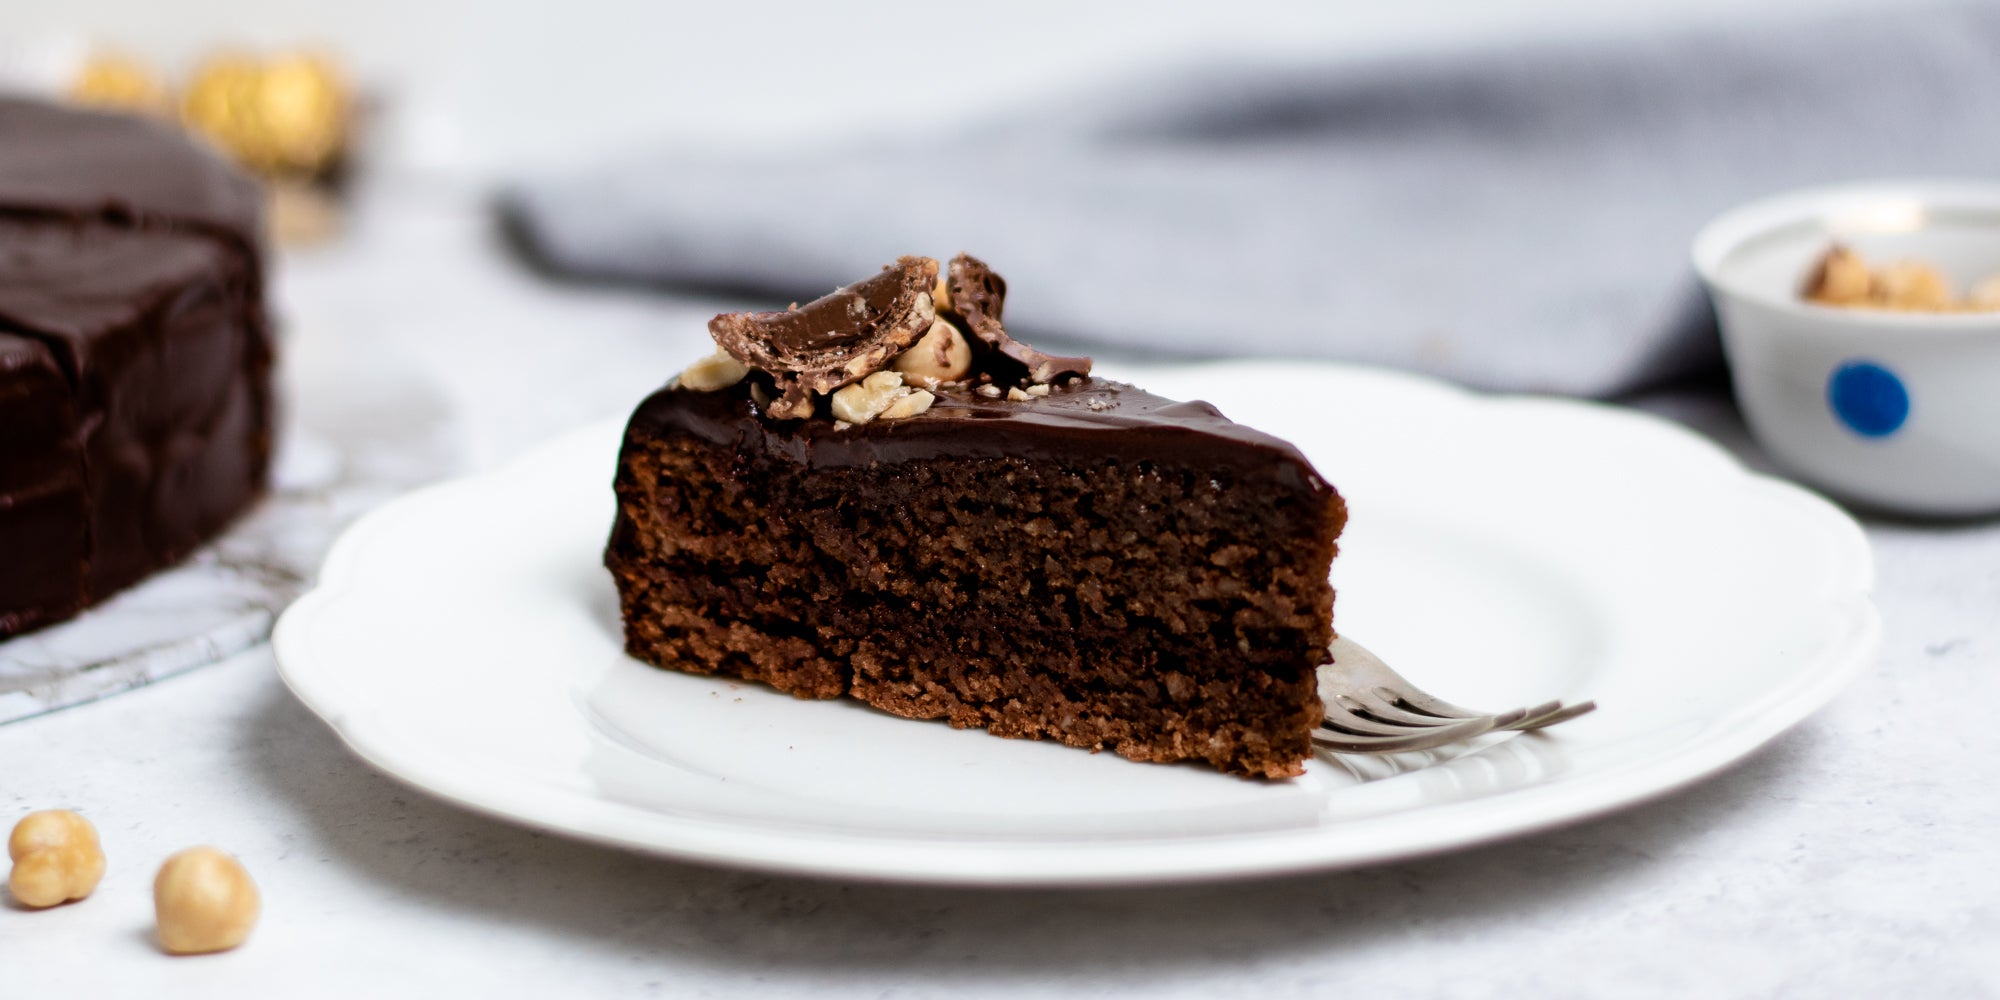 Close up of a slice of Gluten Free Chocolate Truffle Sachertorte served on a plate, scattered in hazelnuts next to a fork